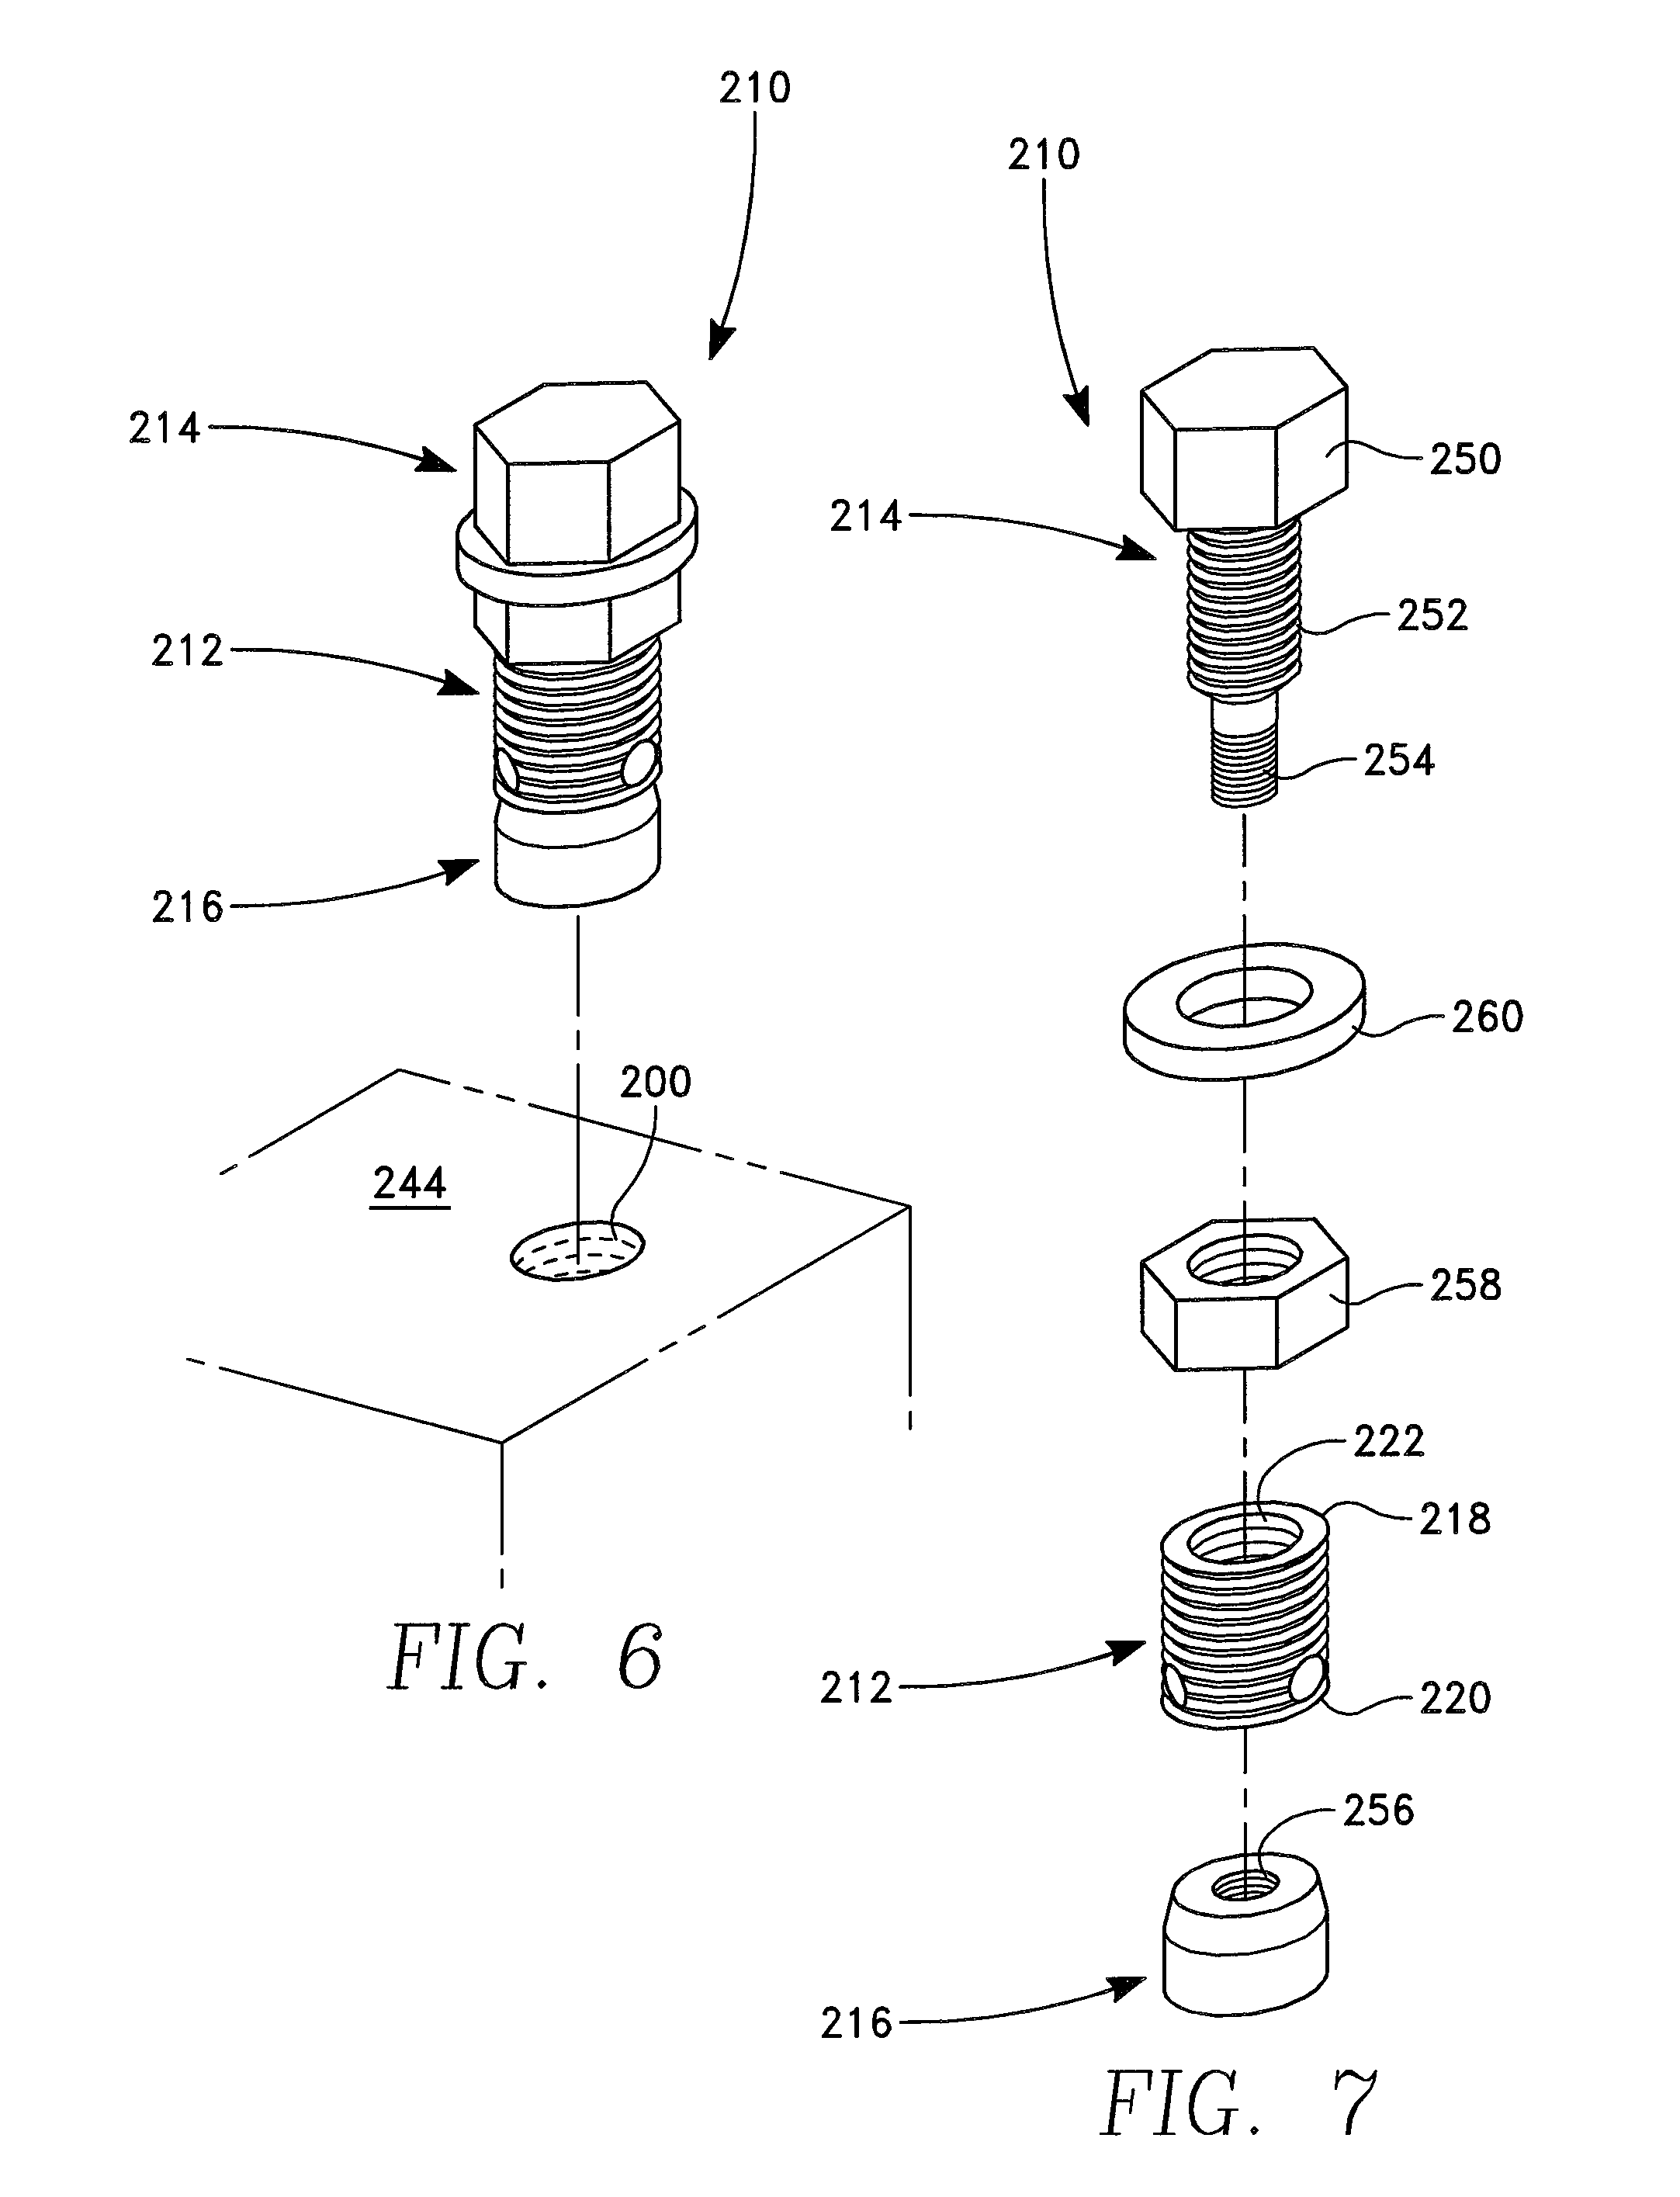 Self-tapping and self-aligning insert to replace damaged threads